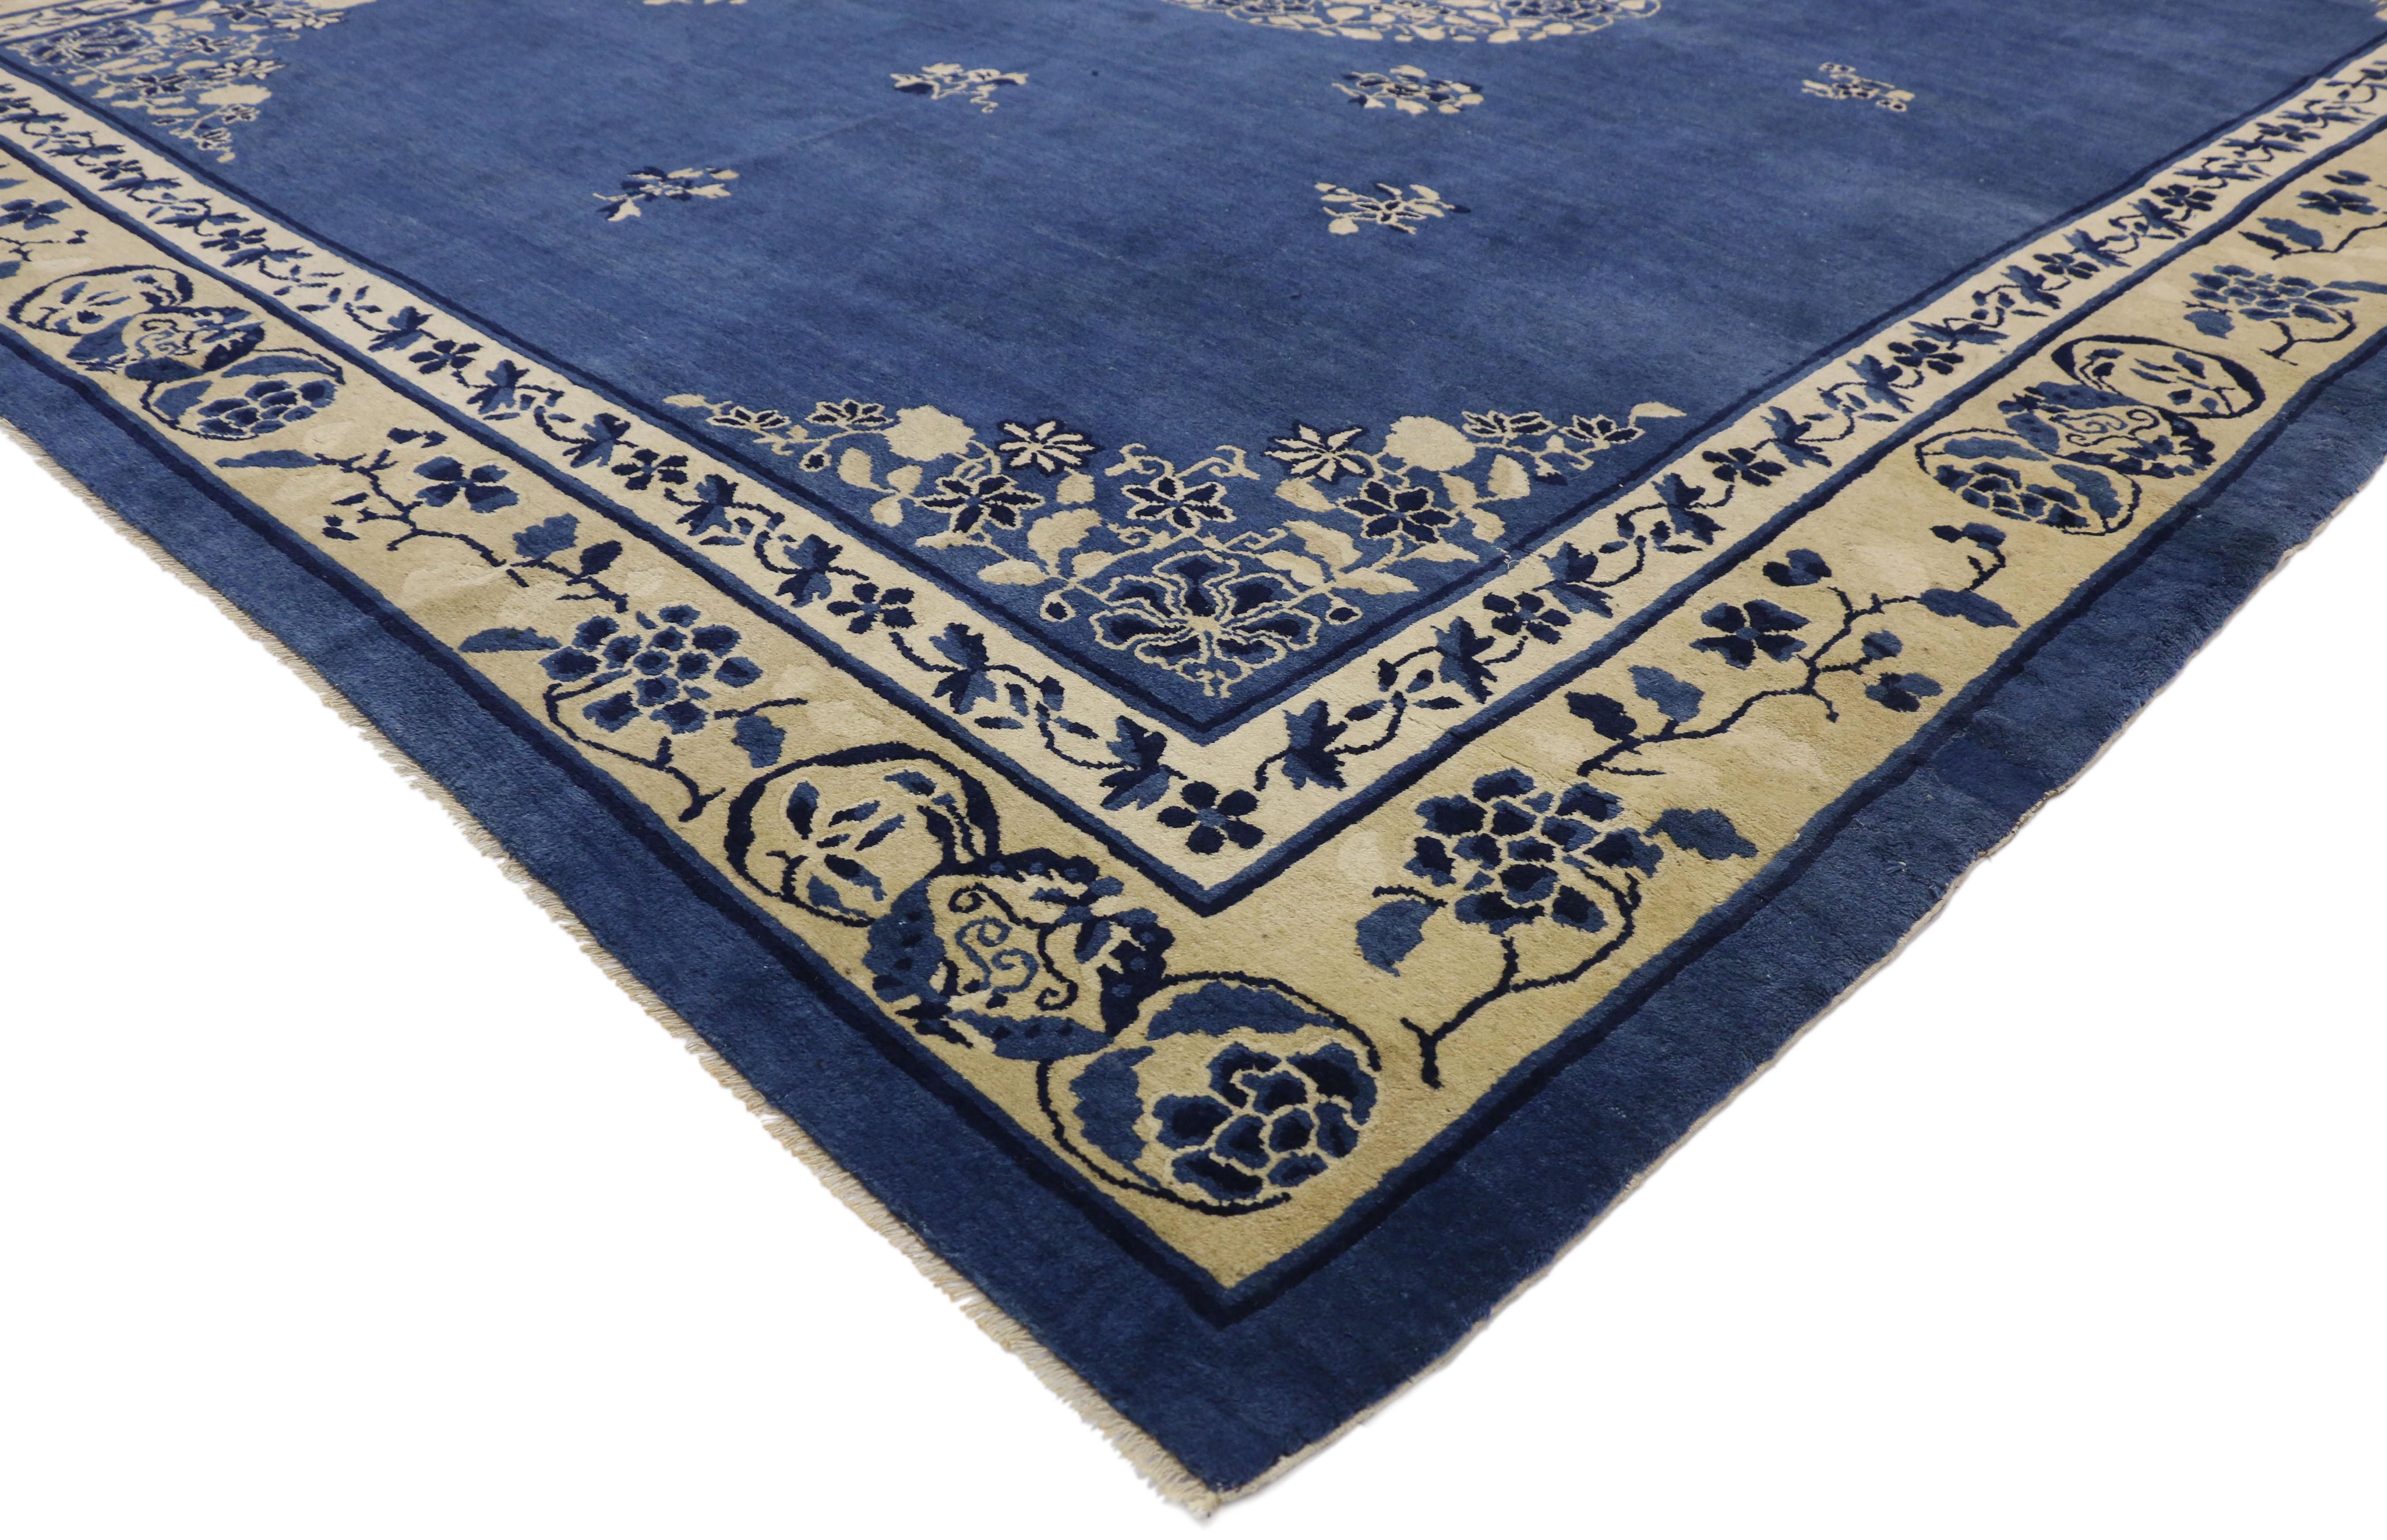 77241 Antique Chinese Peking Rug with Romantic Chinoiserie Style 09'00 x 11'04. This hand-knotted wool antique Chinese Peking rug features a rounded open center medallion decorated with a swirl of peonies and leafy tendrils floating in the center of